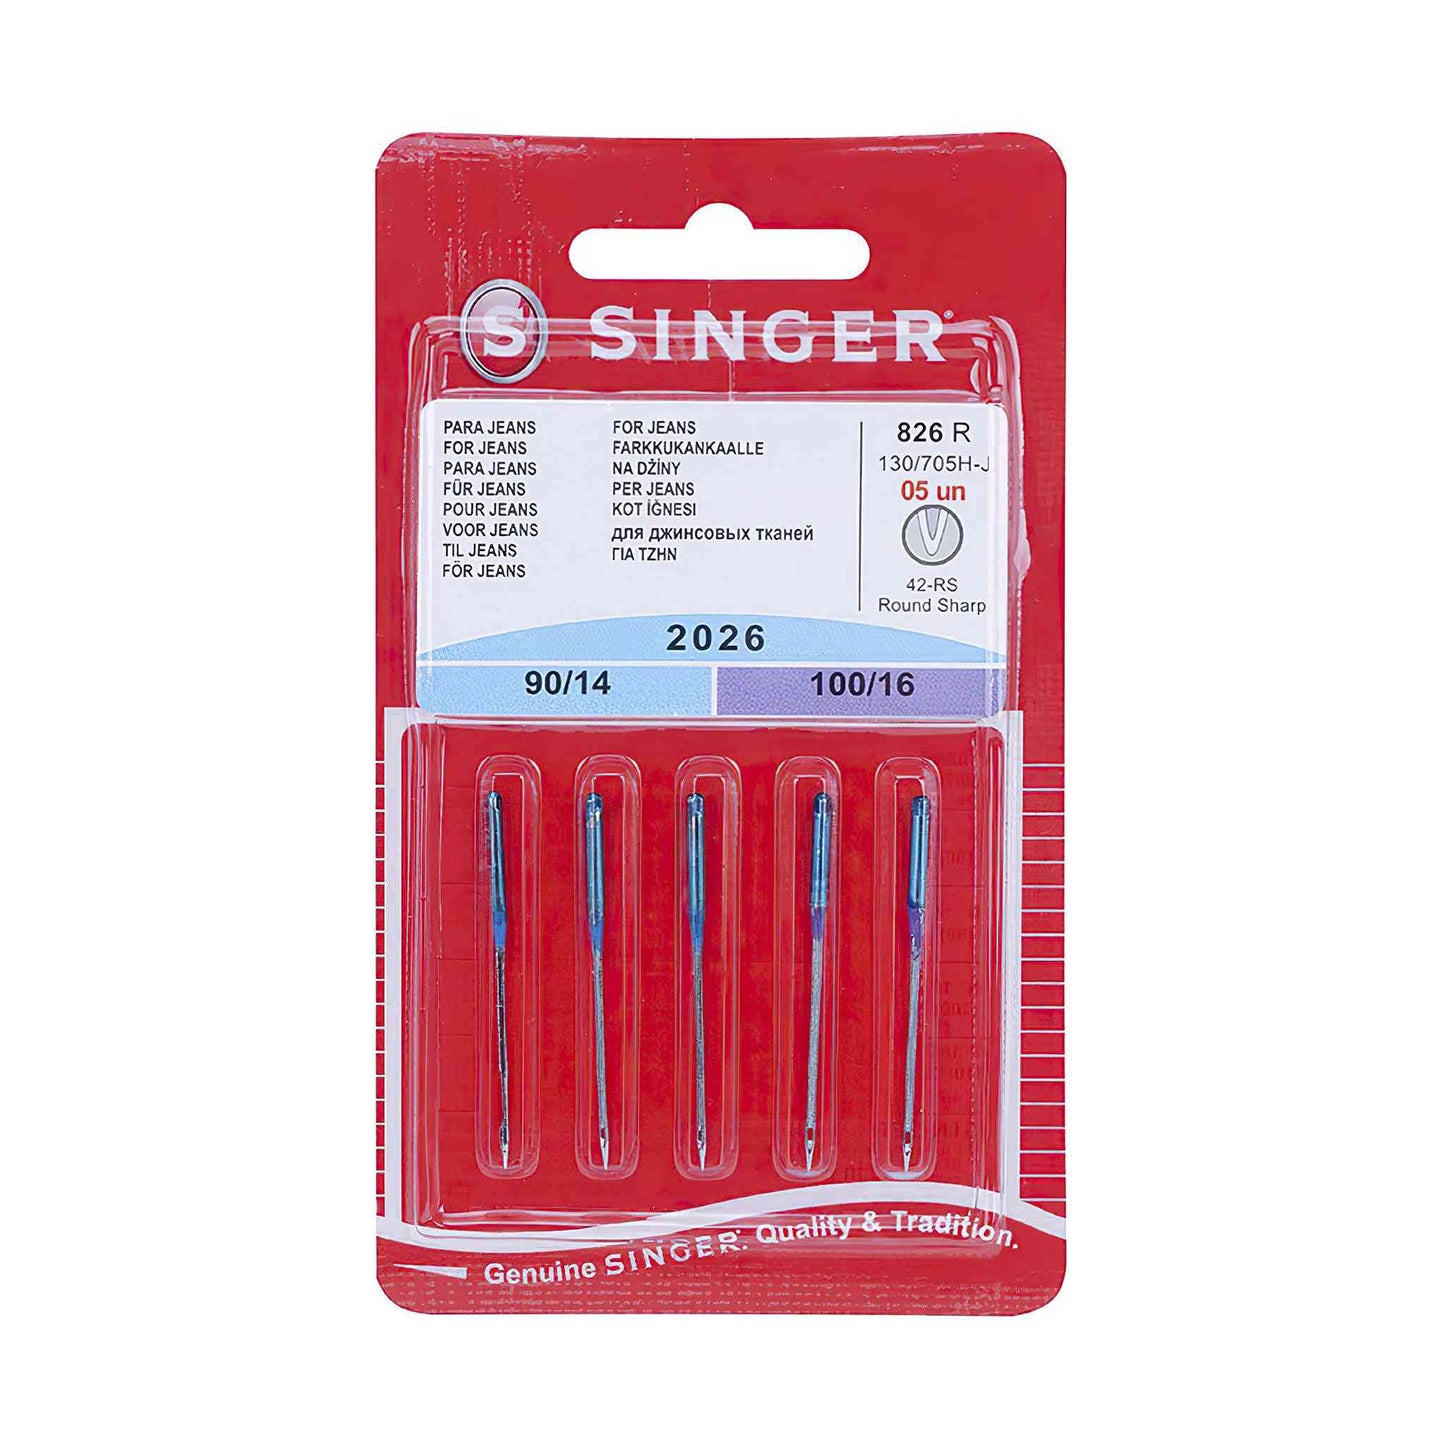 Buy SINGER 2108 Denim Machine Needles, Size 100/16, 3-Pack, 16 3/Pkg Online  at Lowest Price Ever in India | Check Reviews & Ratings - Shop The World